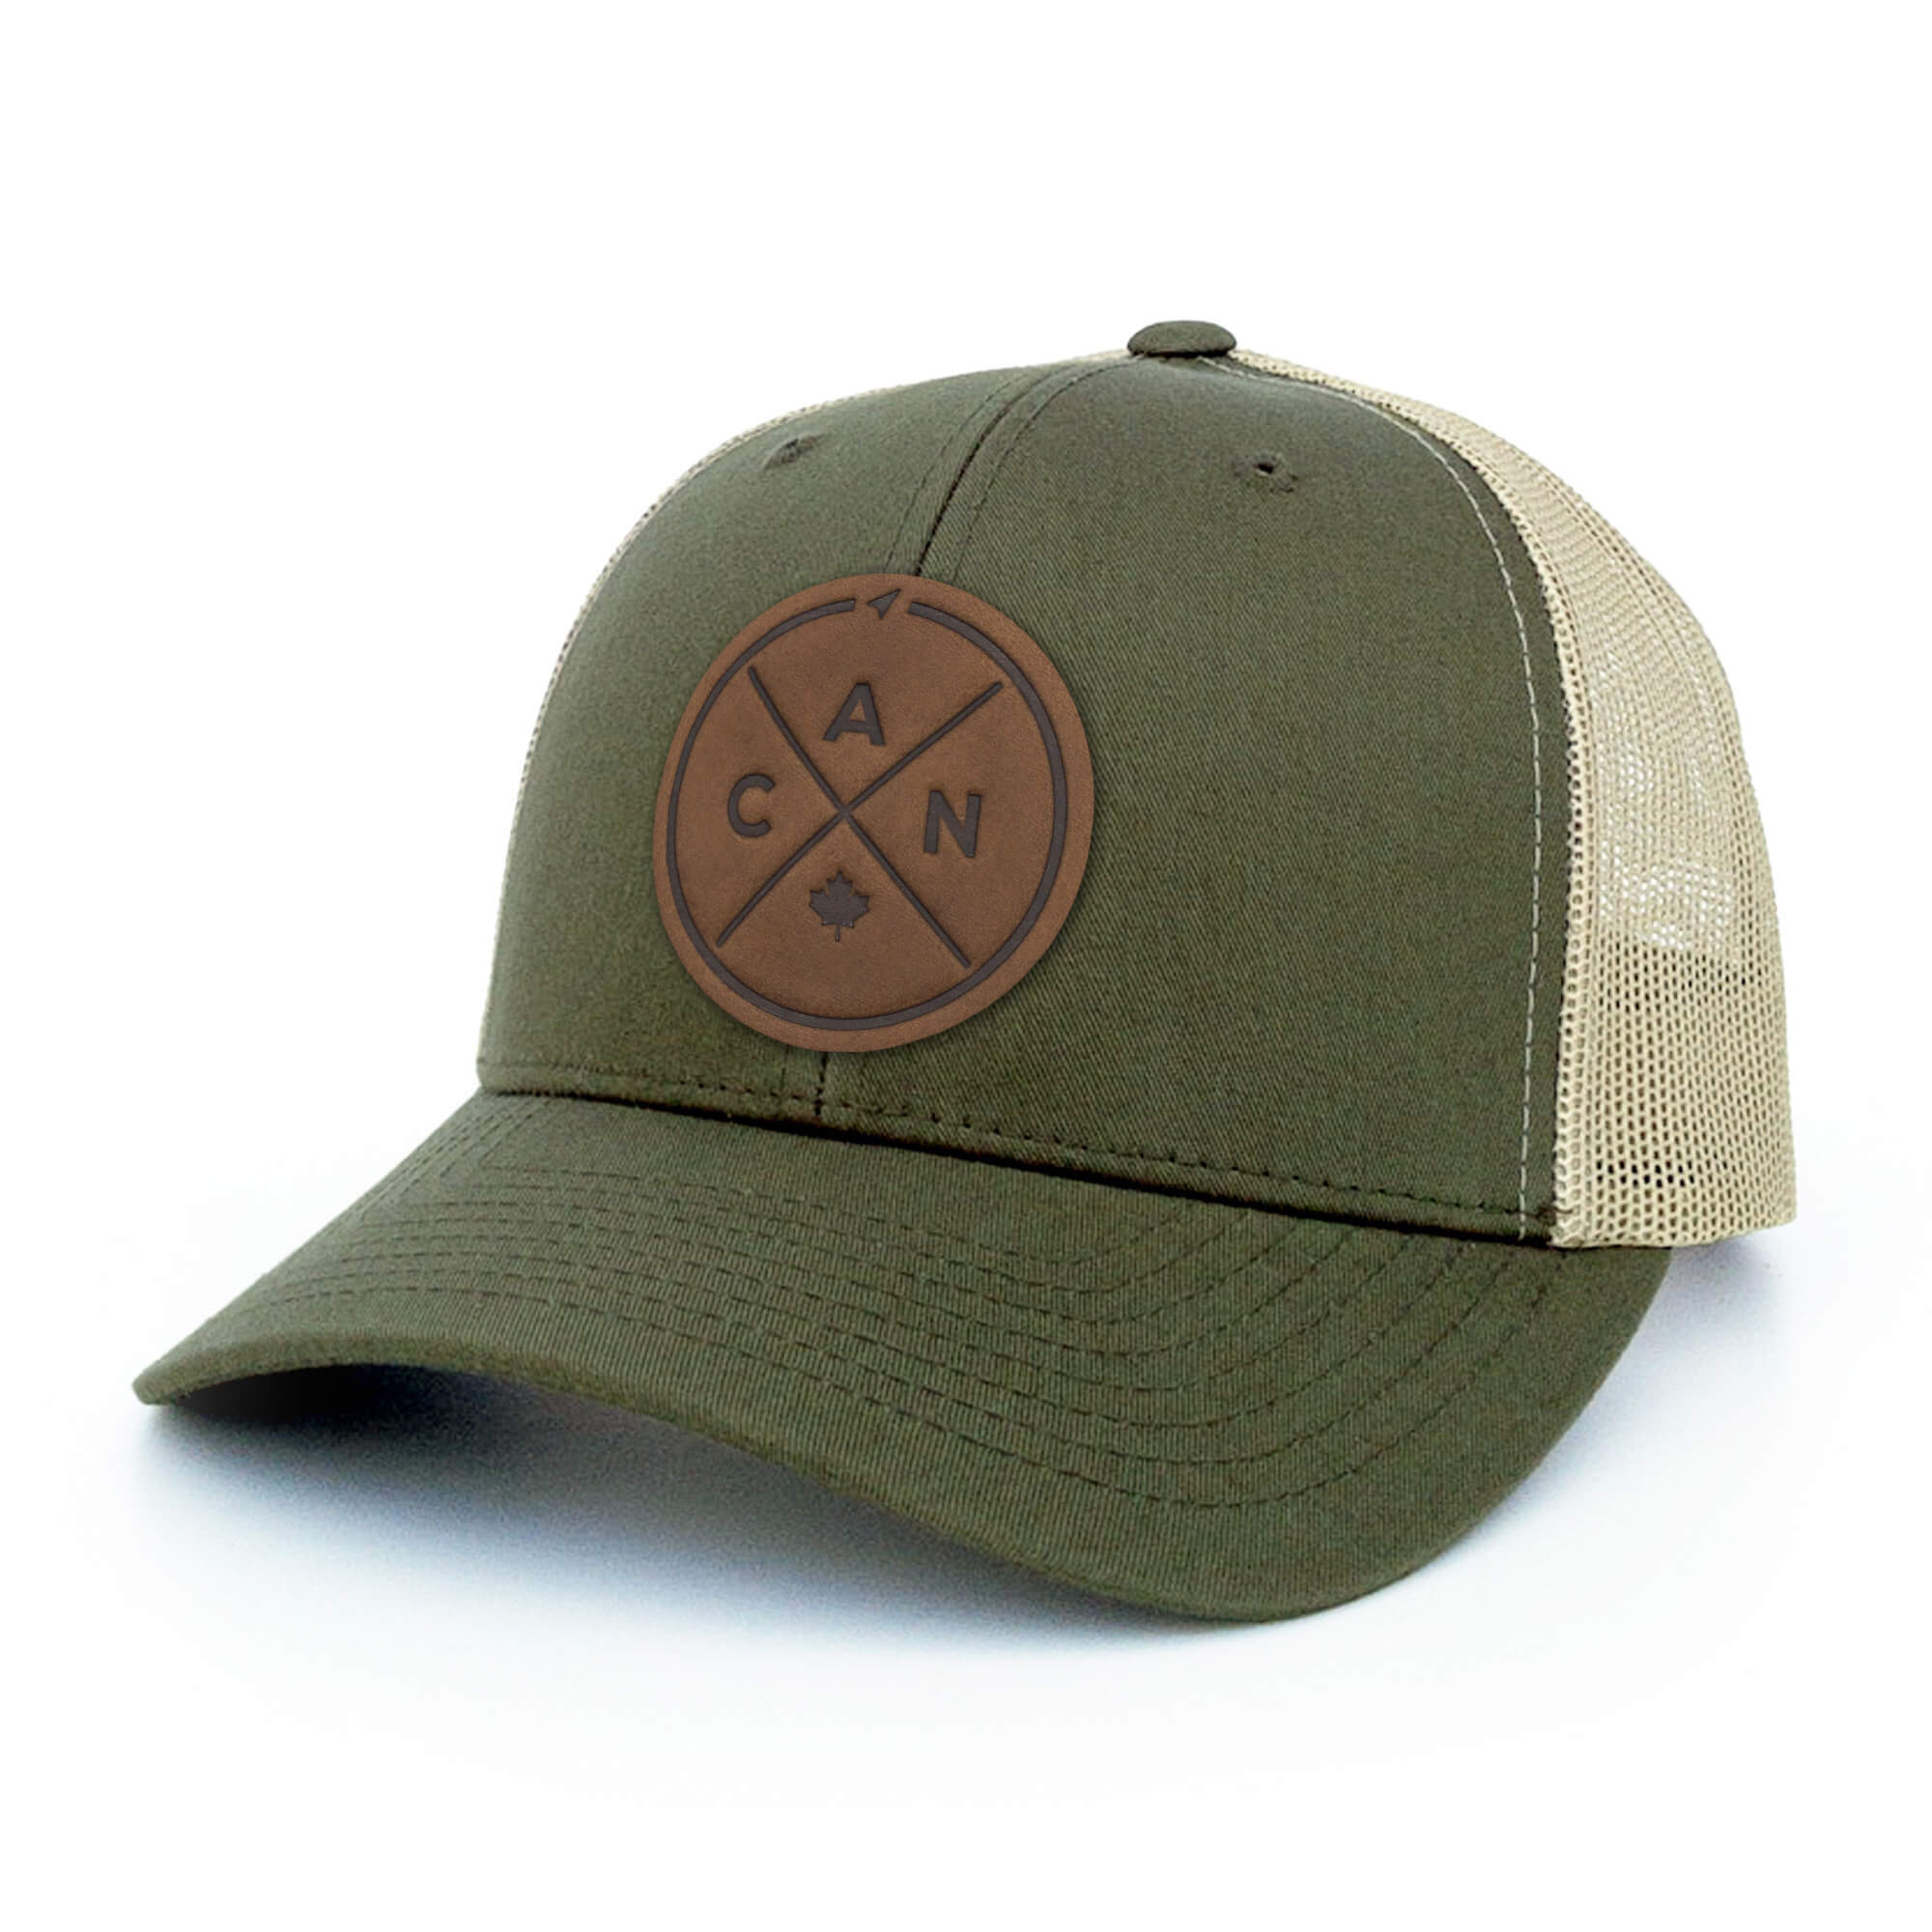 Moss and khaki trucker hat with full-grain leather patch of Canada Compass | BLACK-002-011, CHARC-002-011, NAVY-002-011, HGREY-002-011, MOSS-002-011, BROWN-002-011, RED-002-011